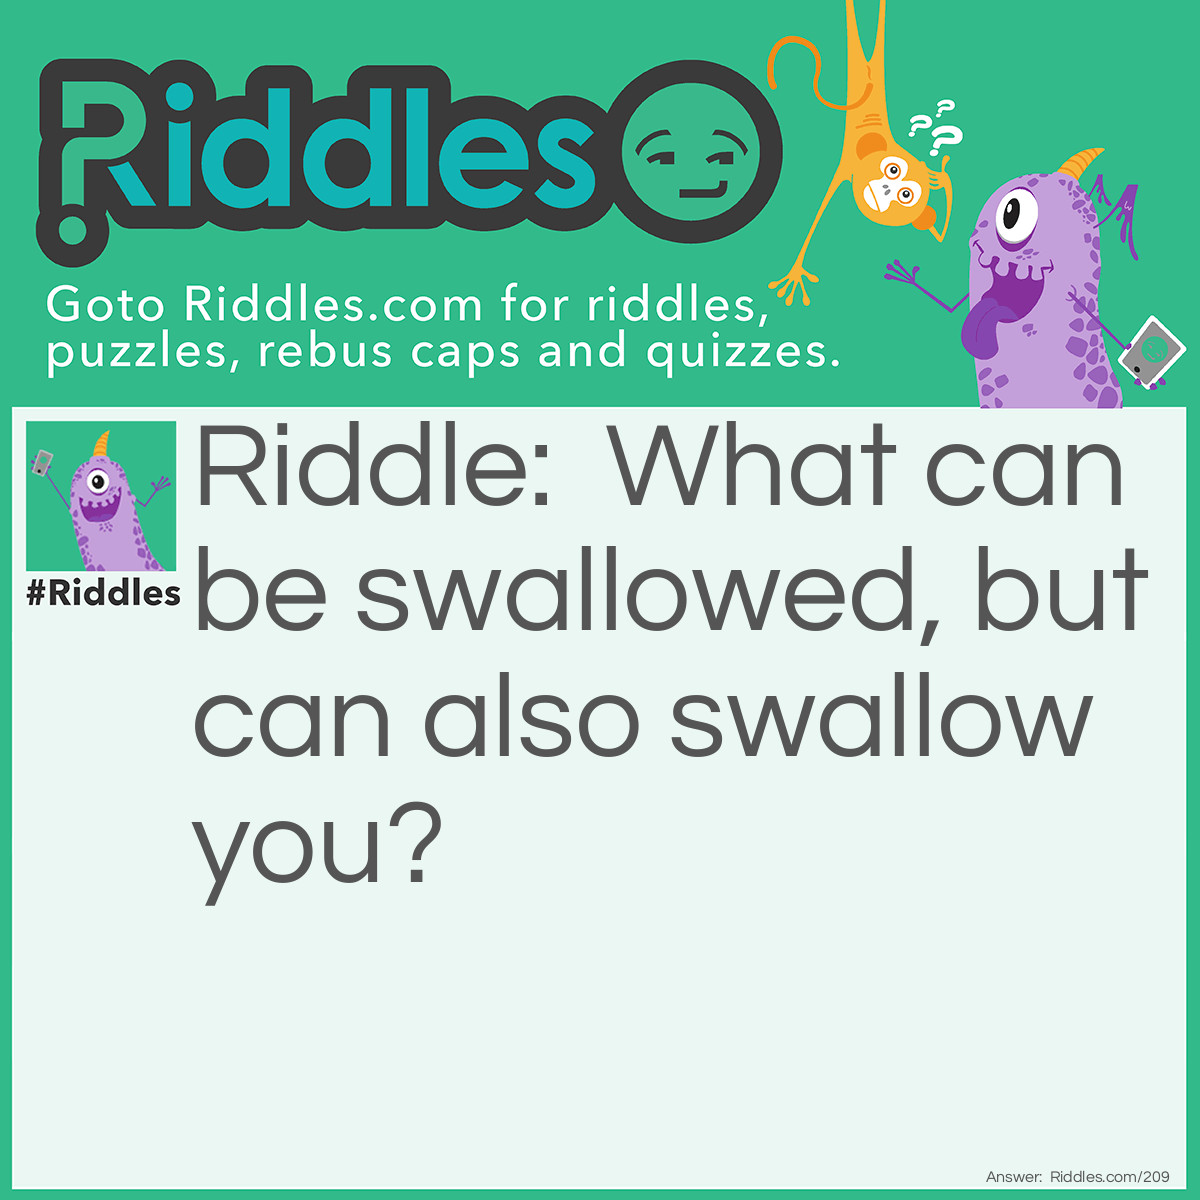 Riddle: What can be swallowed, but can also swallow you? Answer: Pride.